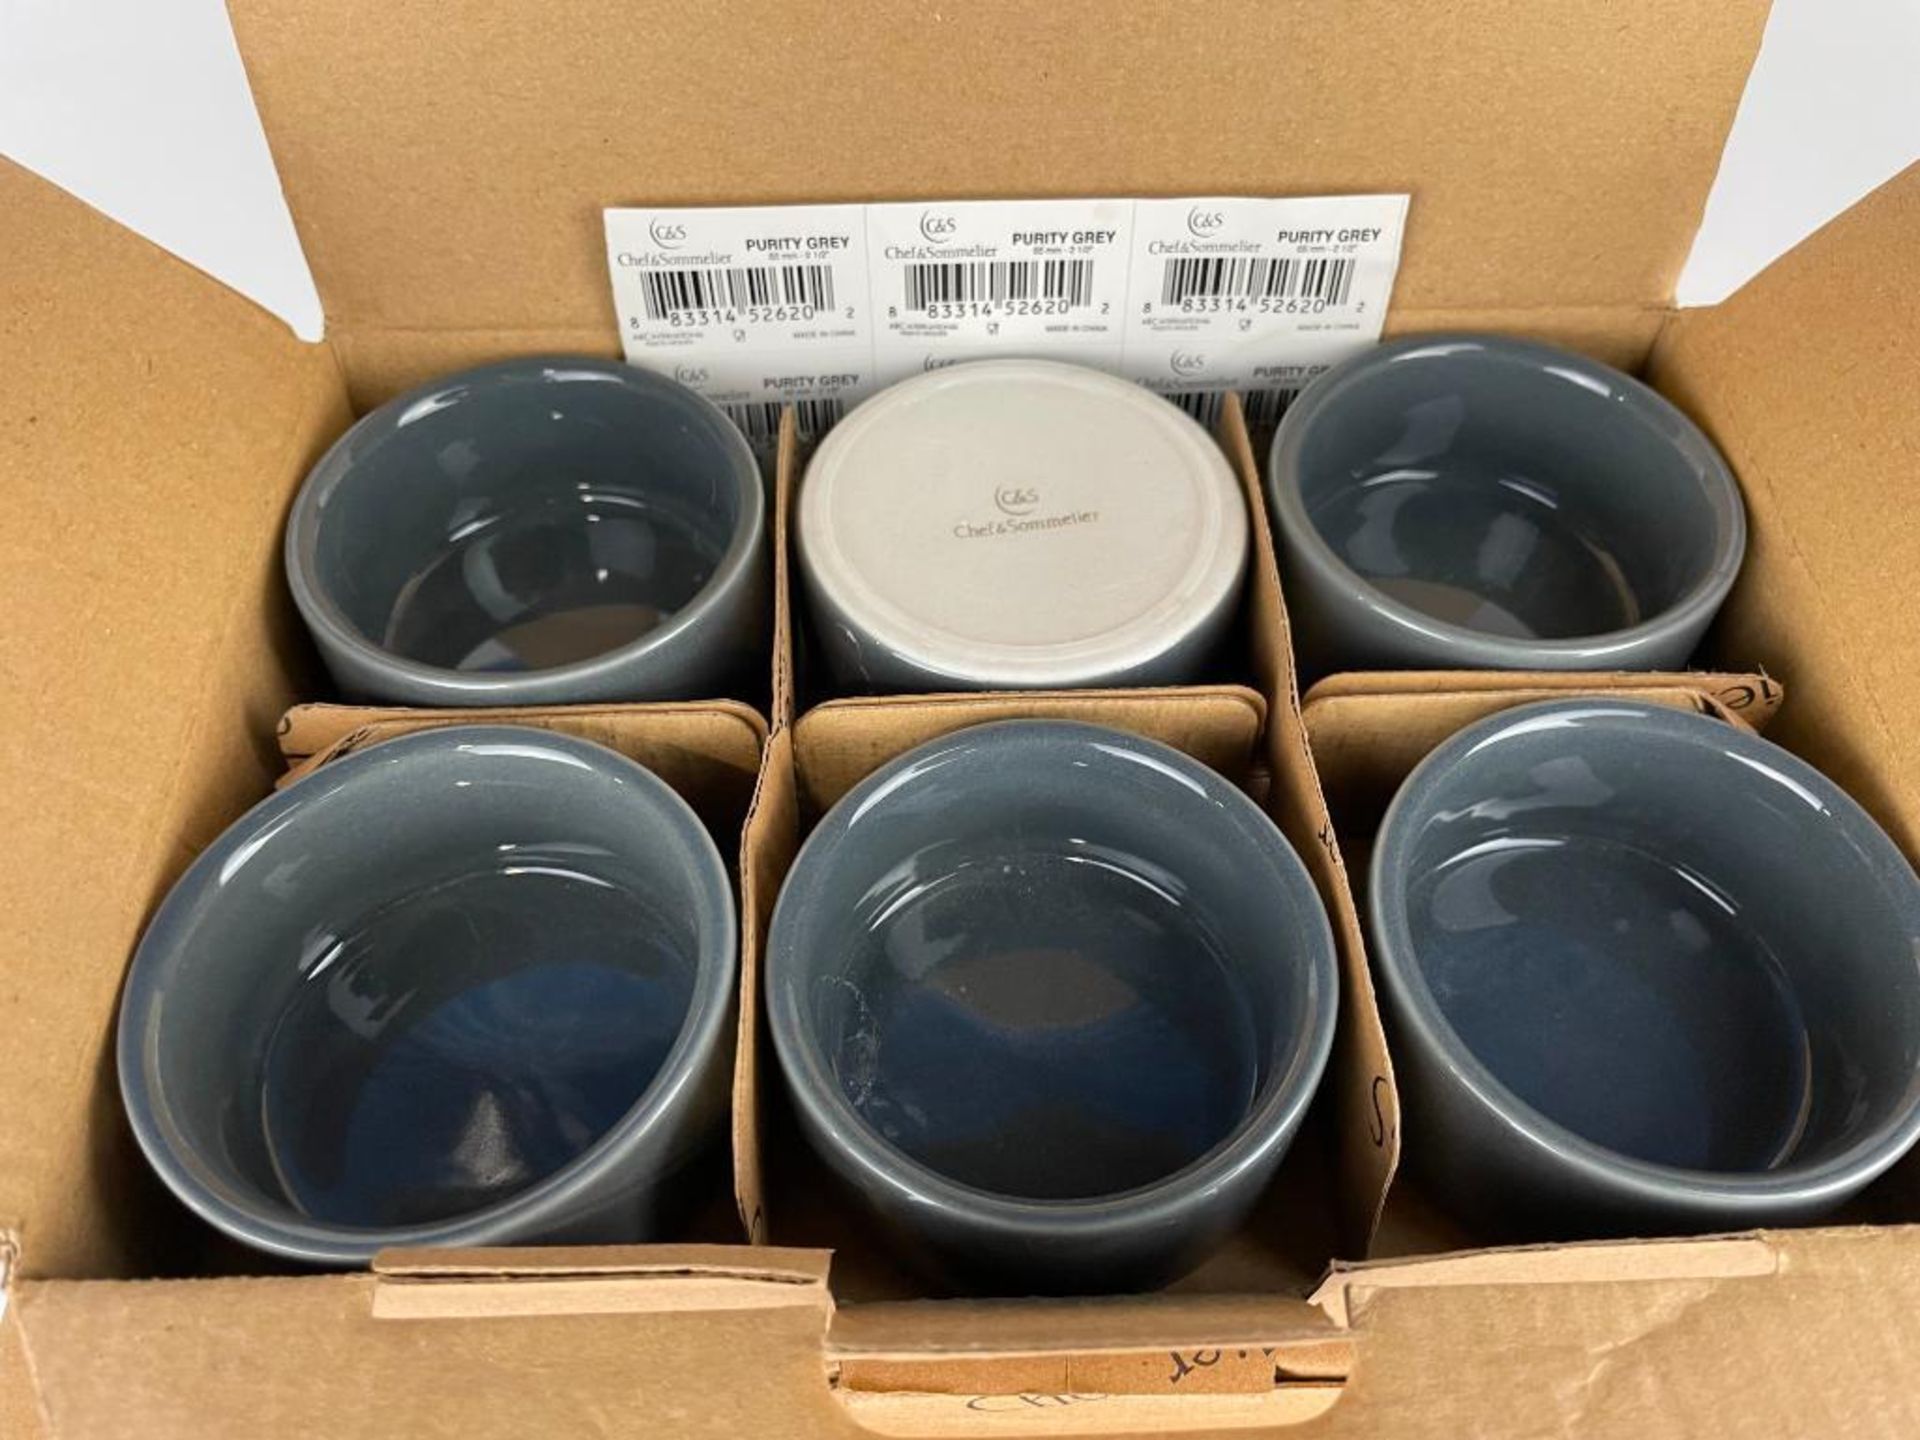 2 CASES OF CHEF & SOMMELIER PURITY 2 OZ. GREY CIRCULAR BOWLS, 24/CASE - NEW - Image 2 of 6